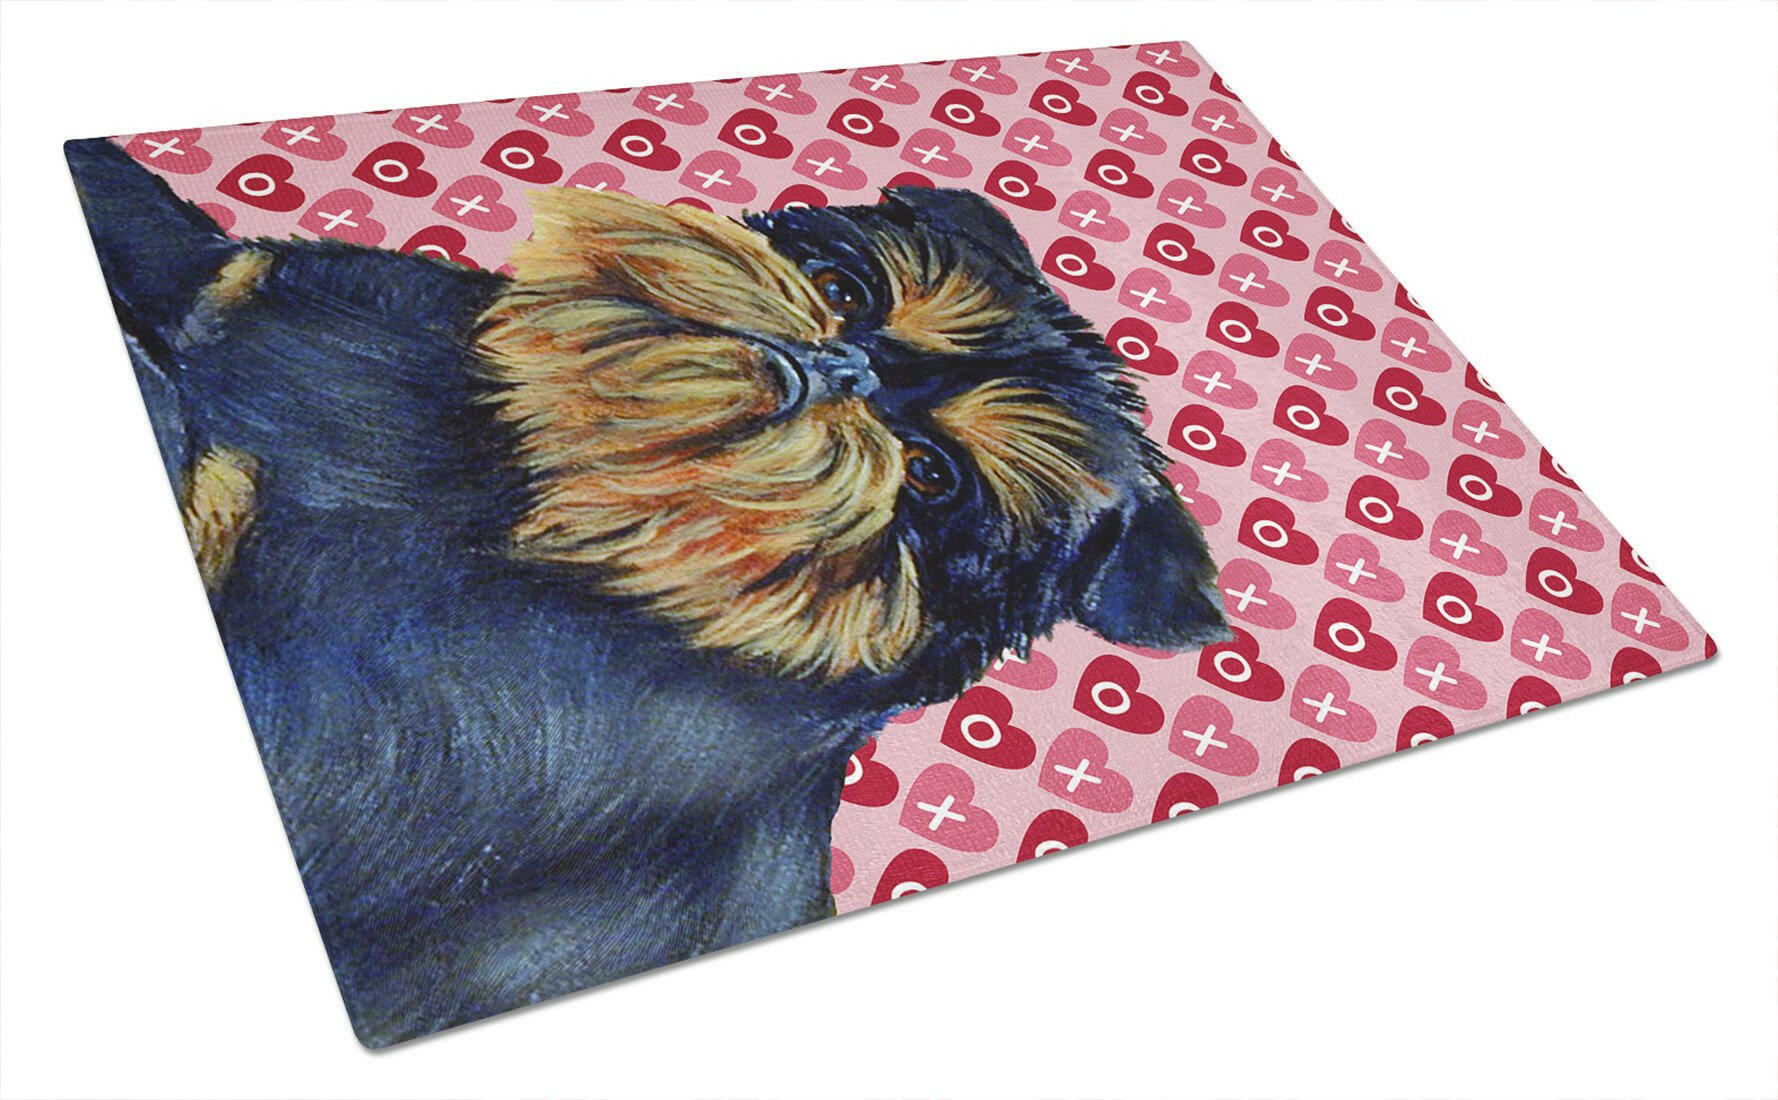 Brussels Griffon Hearts Love and Valentine's Day Glass Cutting Board Large by Caroline's Treasures